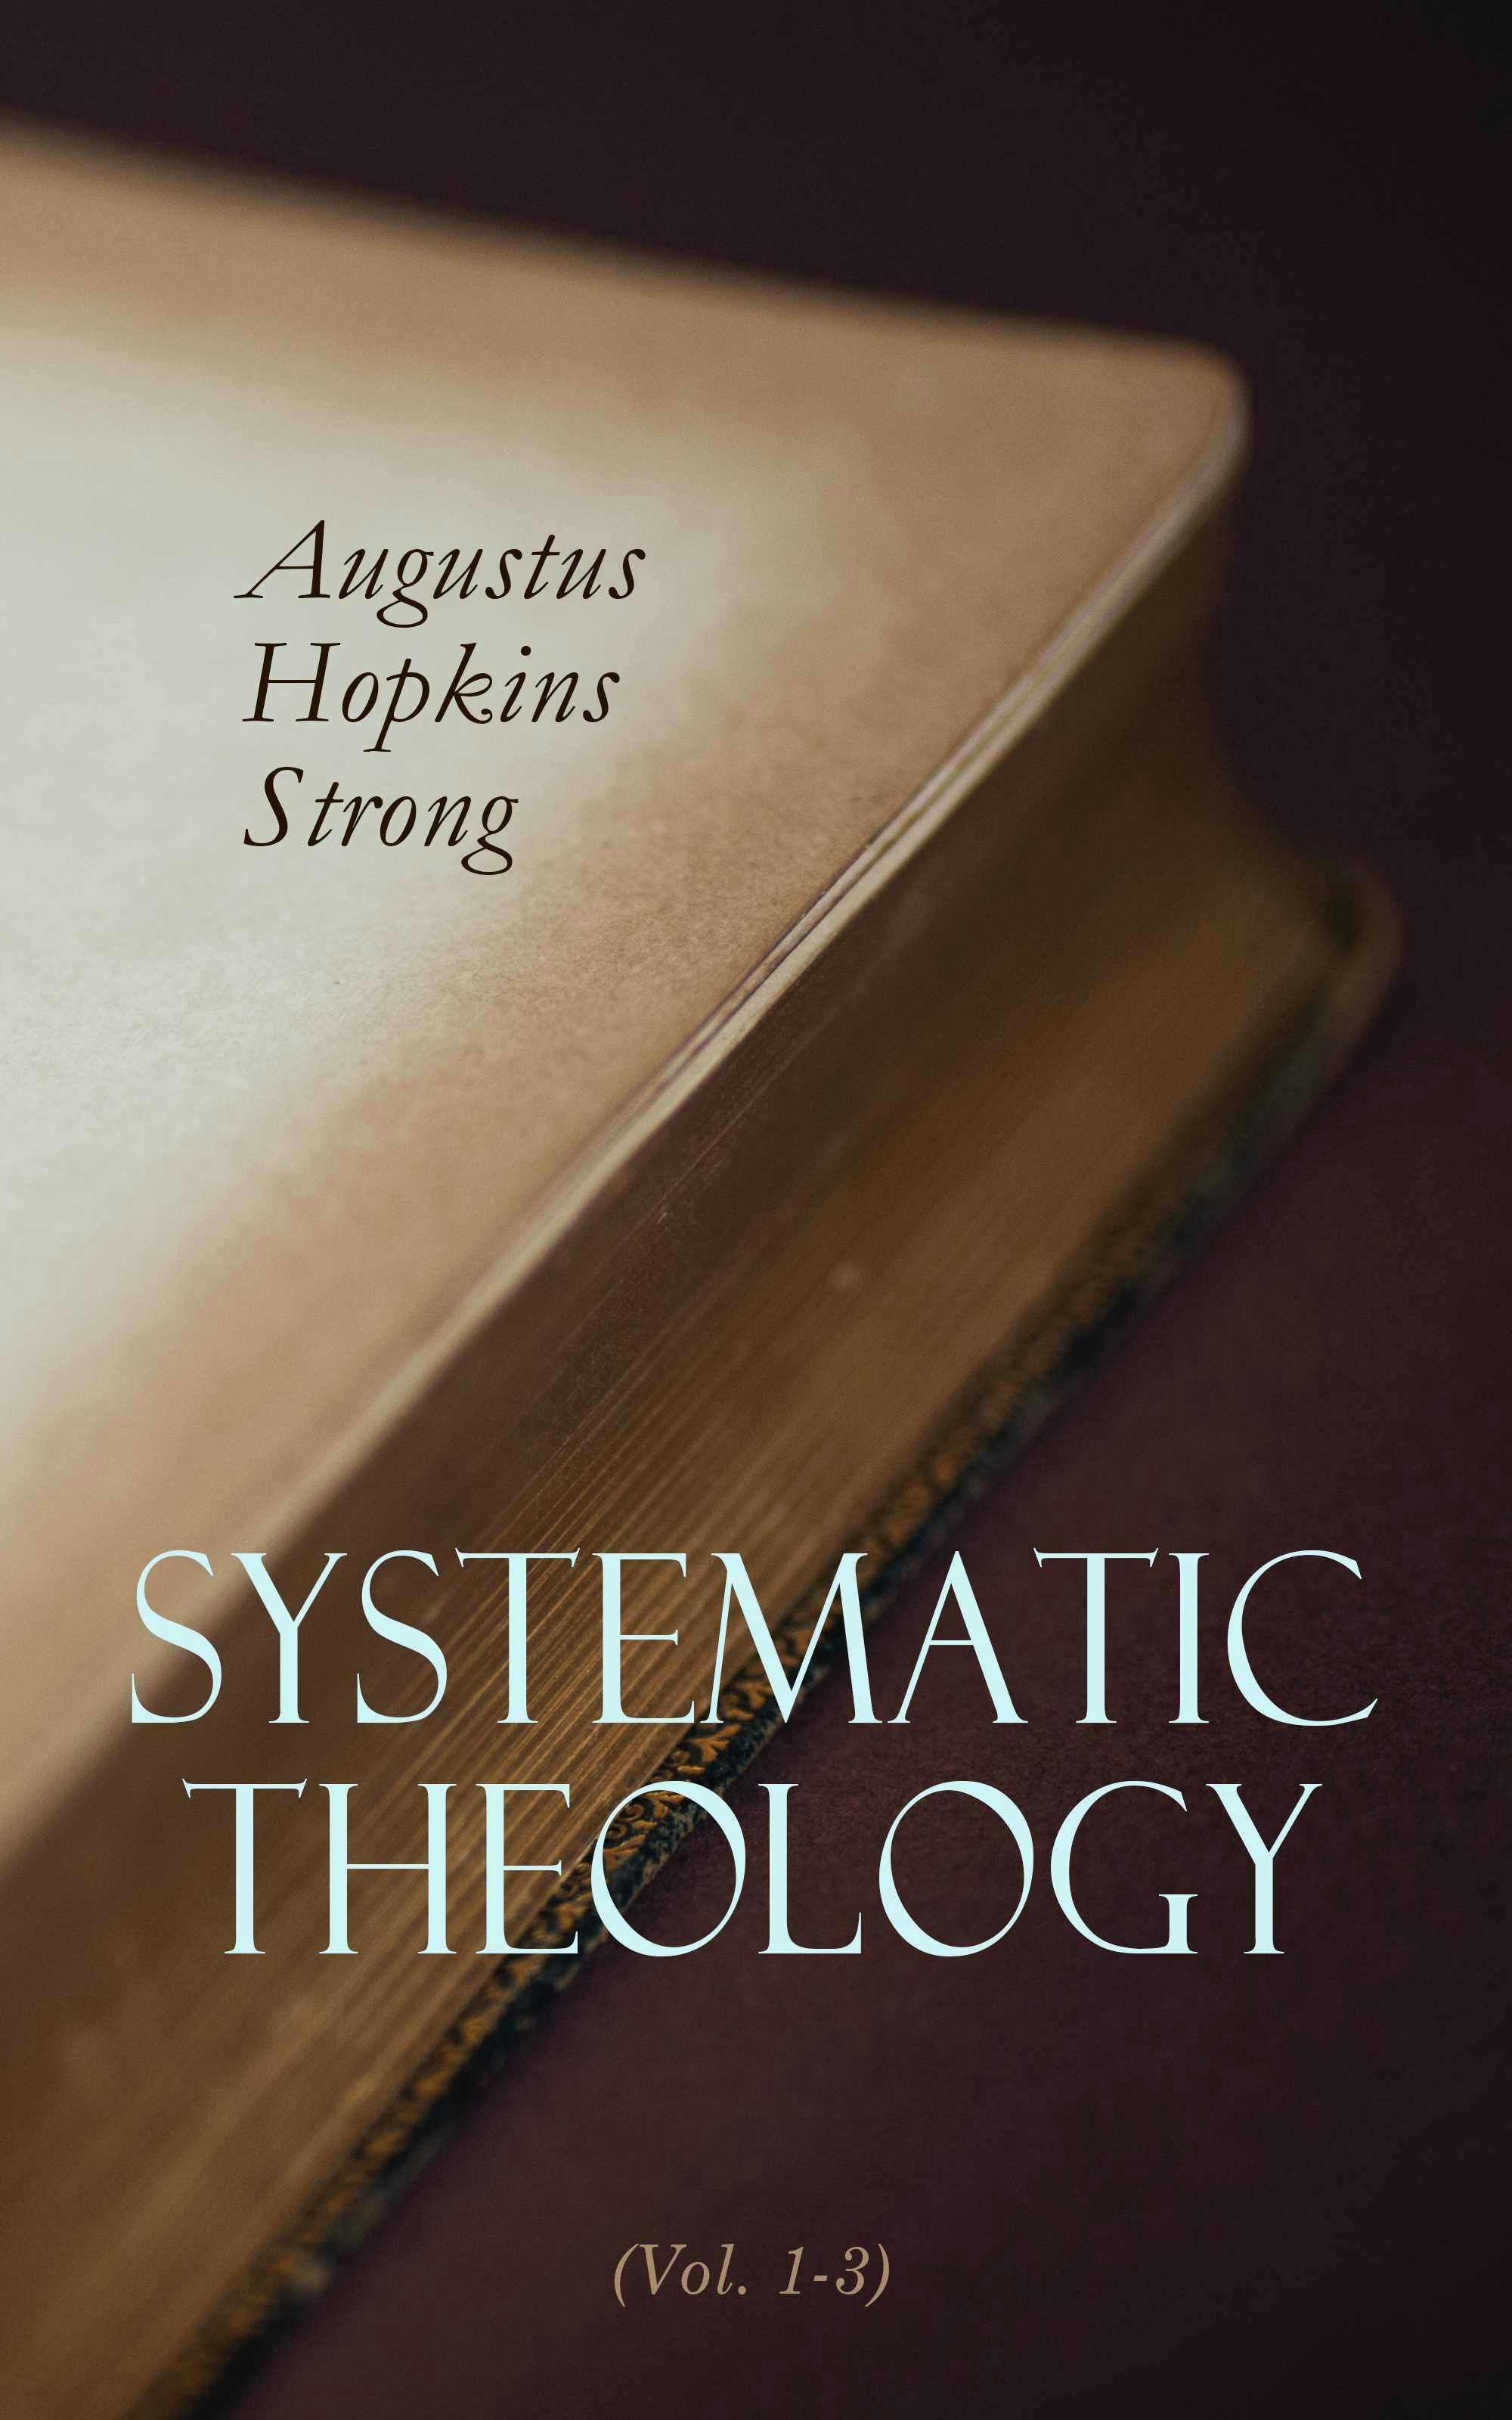 Systematic Theology (Vol. 1-3): Complete Edition - Augustus Hopkins Strong